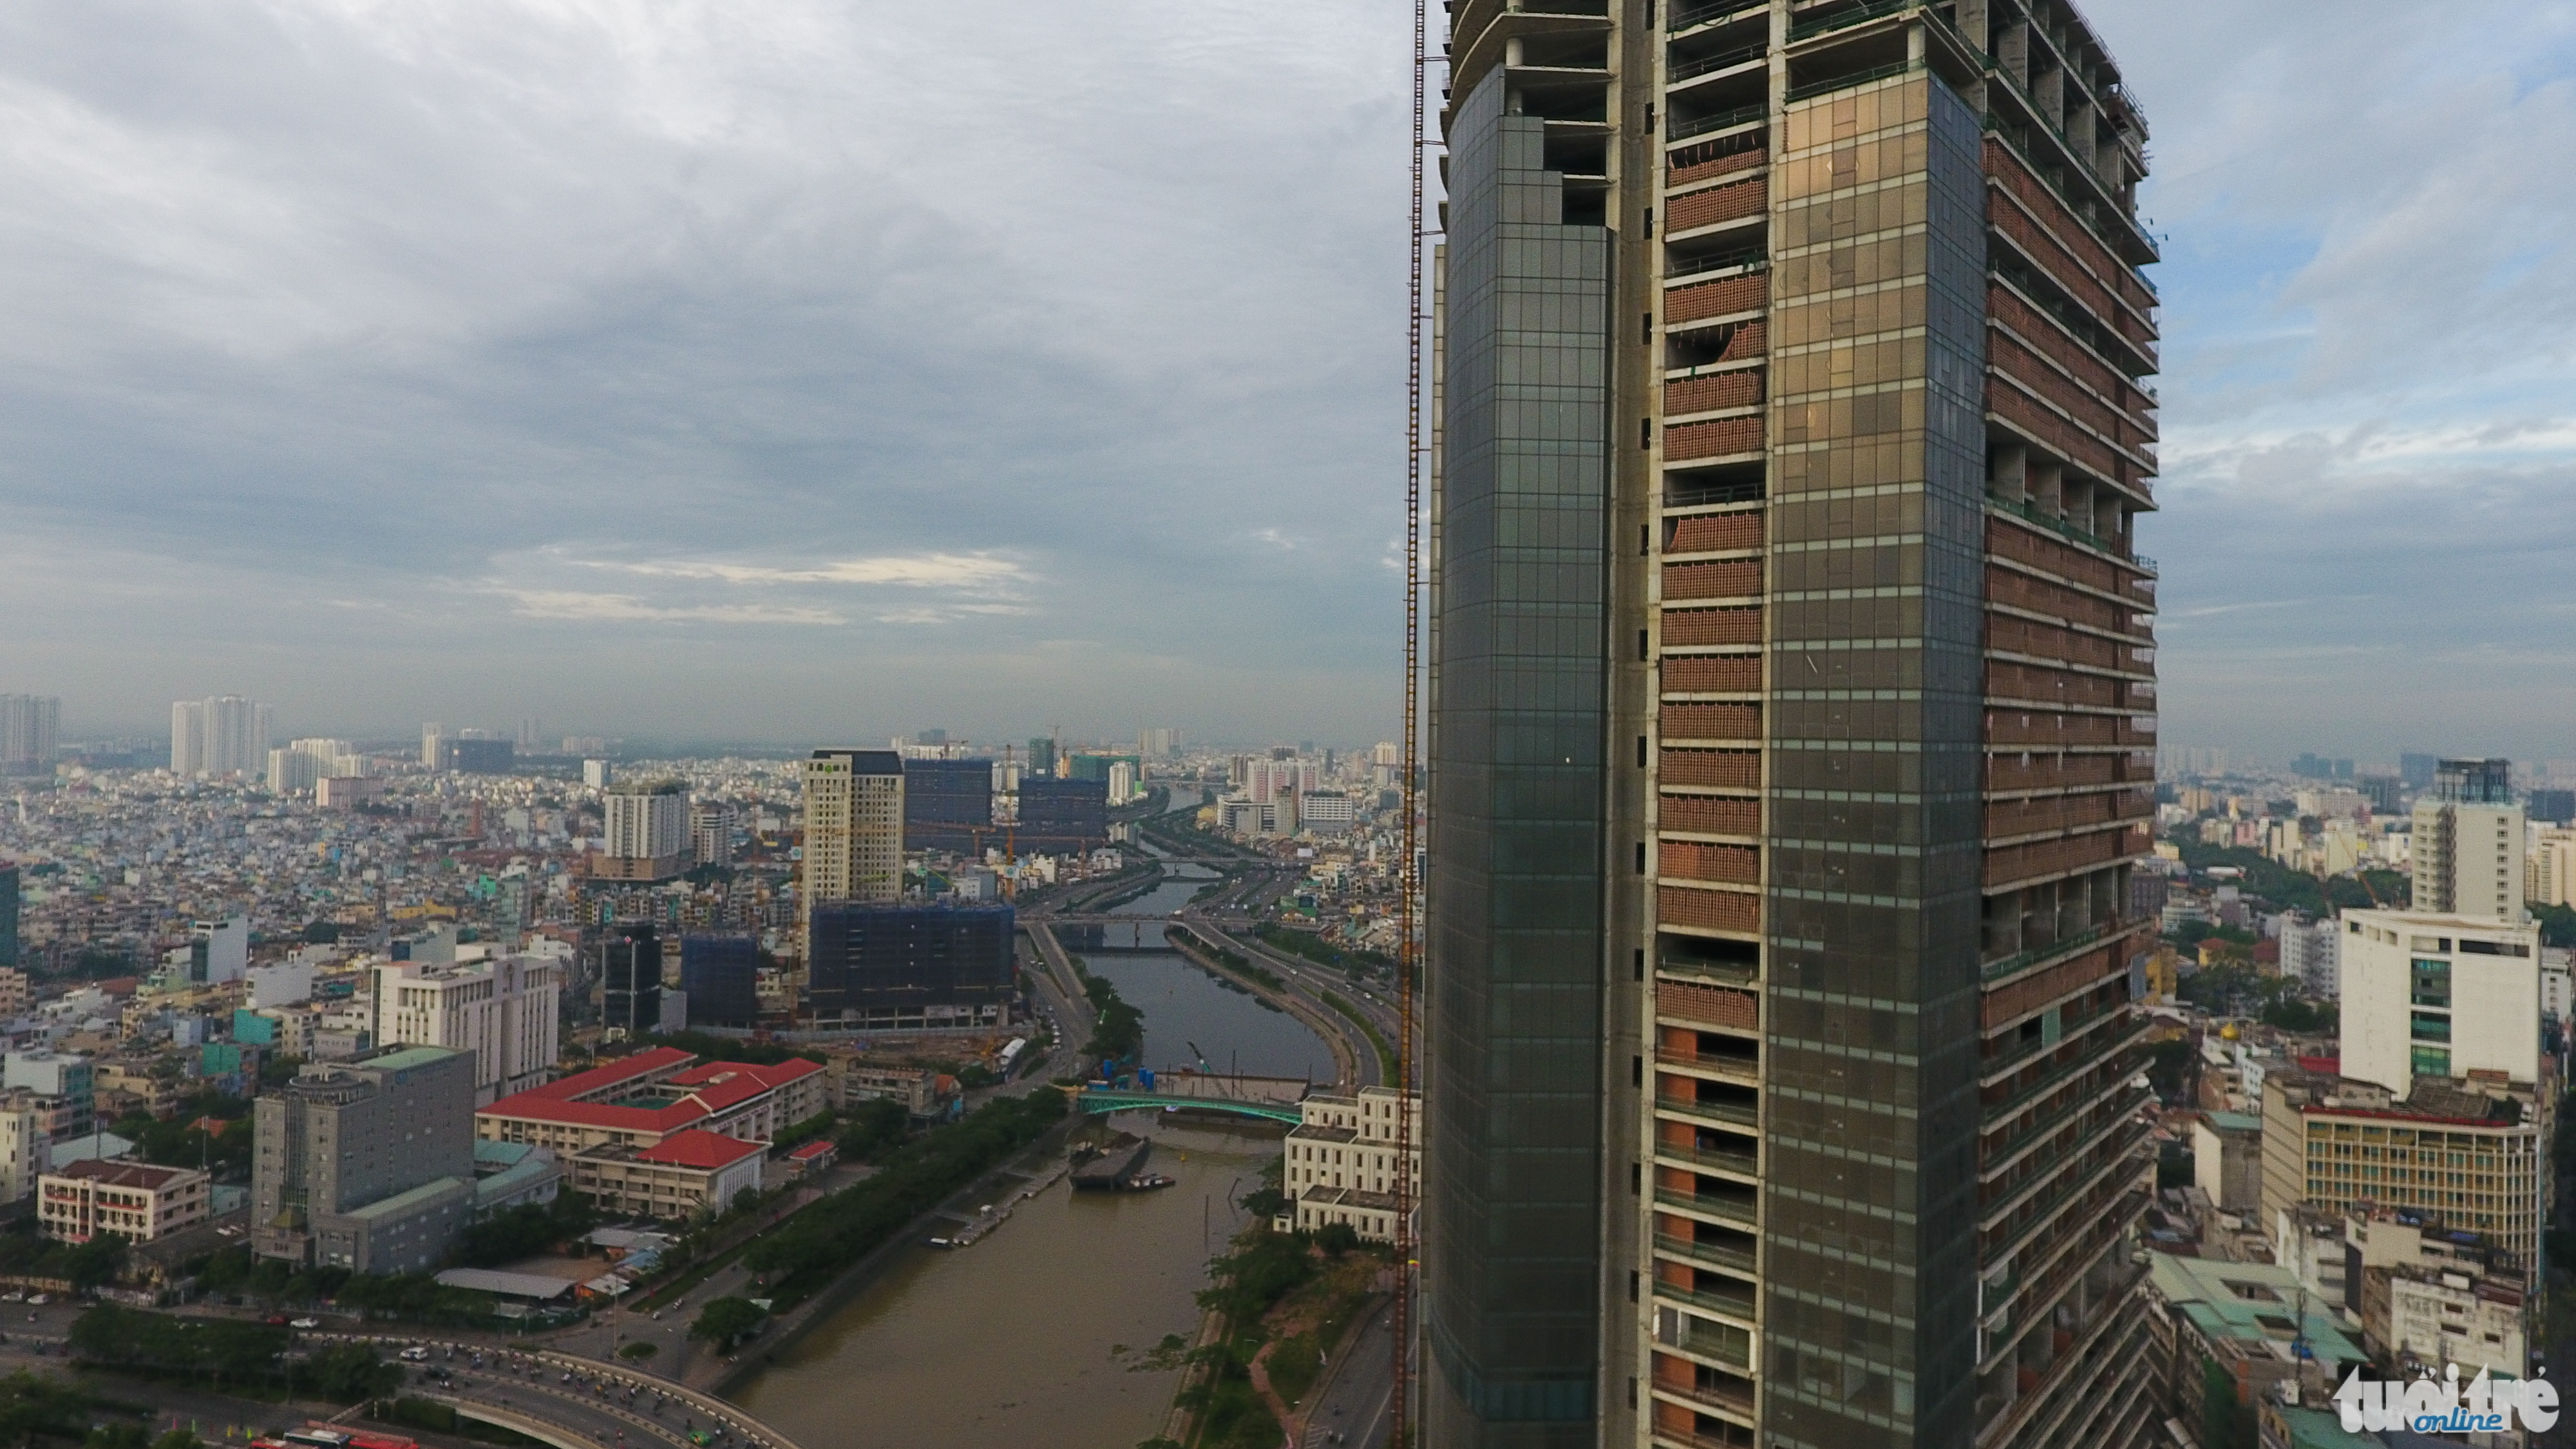 The tower overlooks the Ben Nghe Canal in Ho chi Minh City.